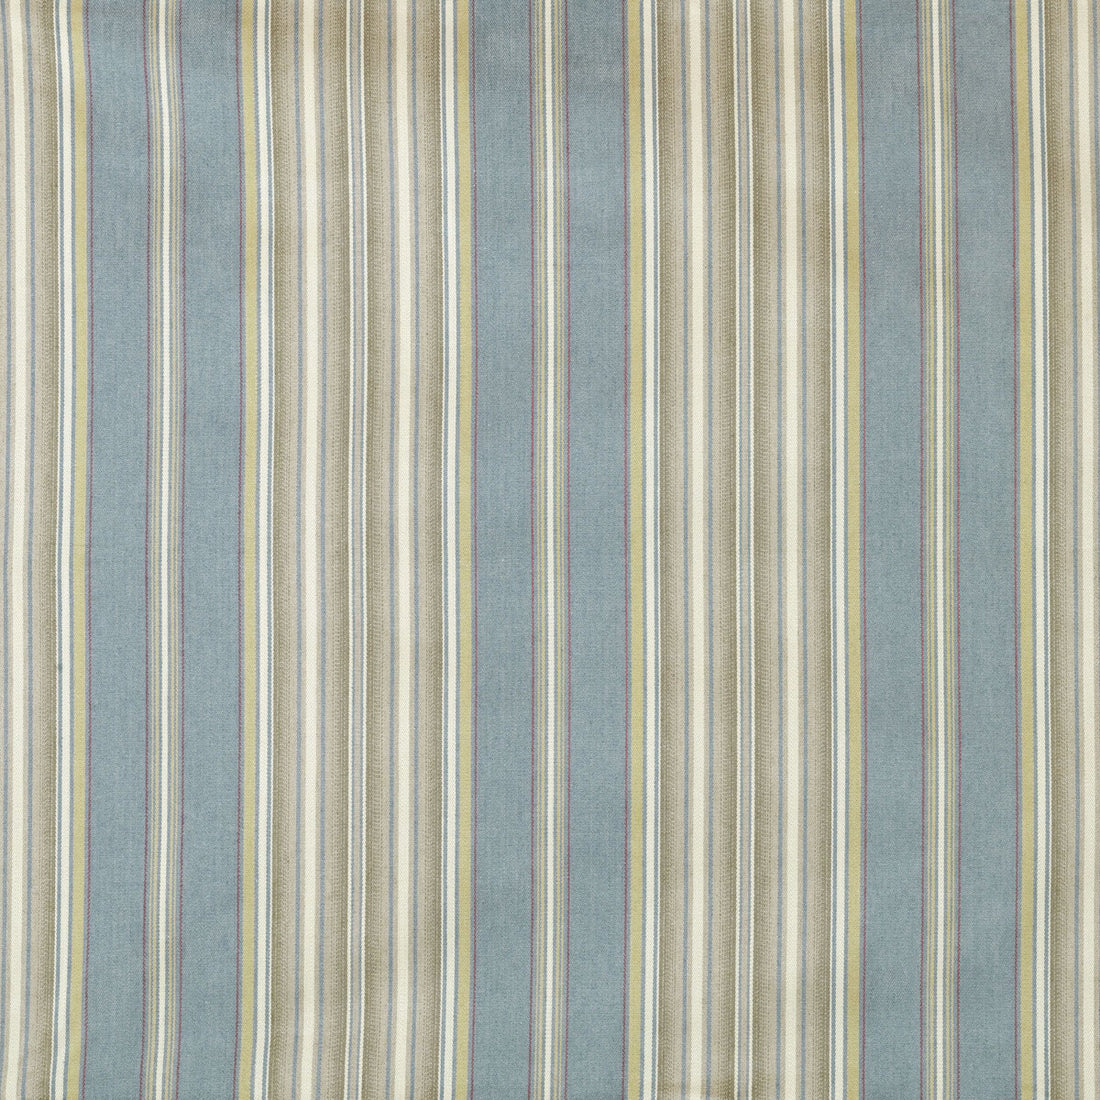 Windsor Stripe fabric in aqua/gold color - pattern BFC-3659.134.0 - by Lee Jofa in the Blithfield collection